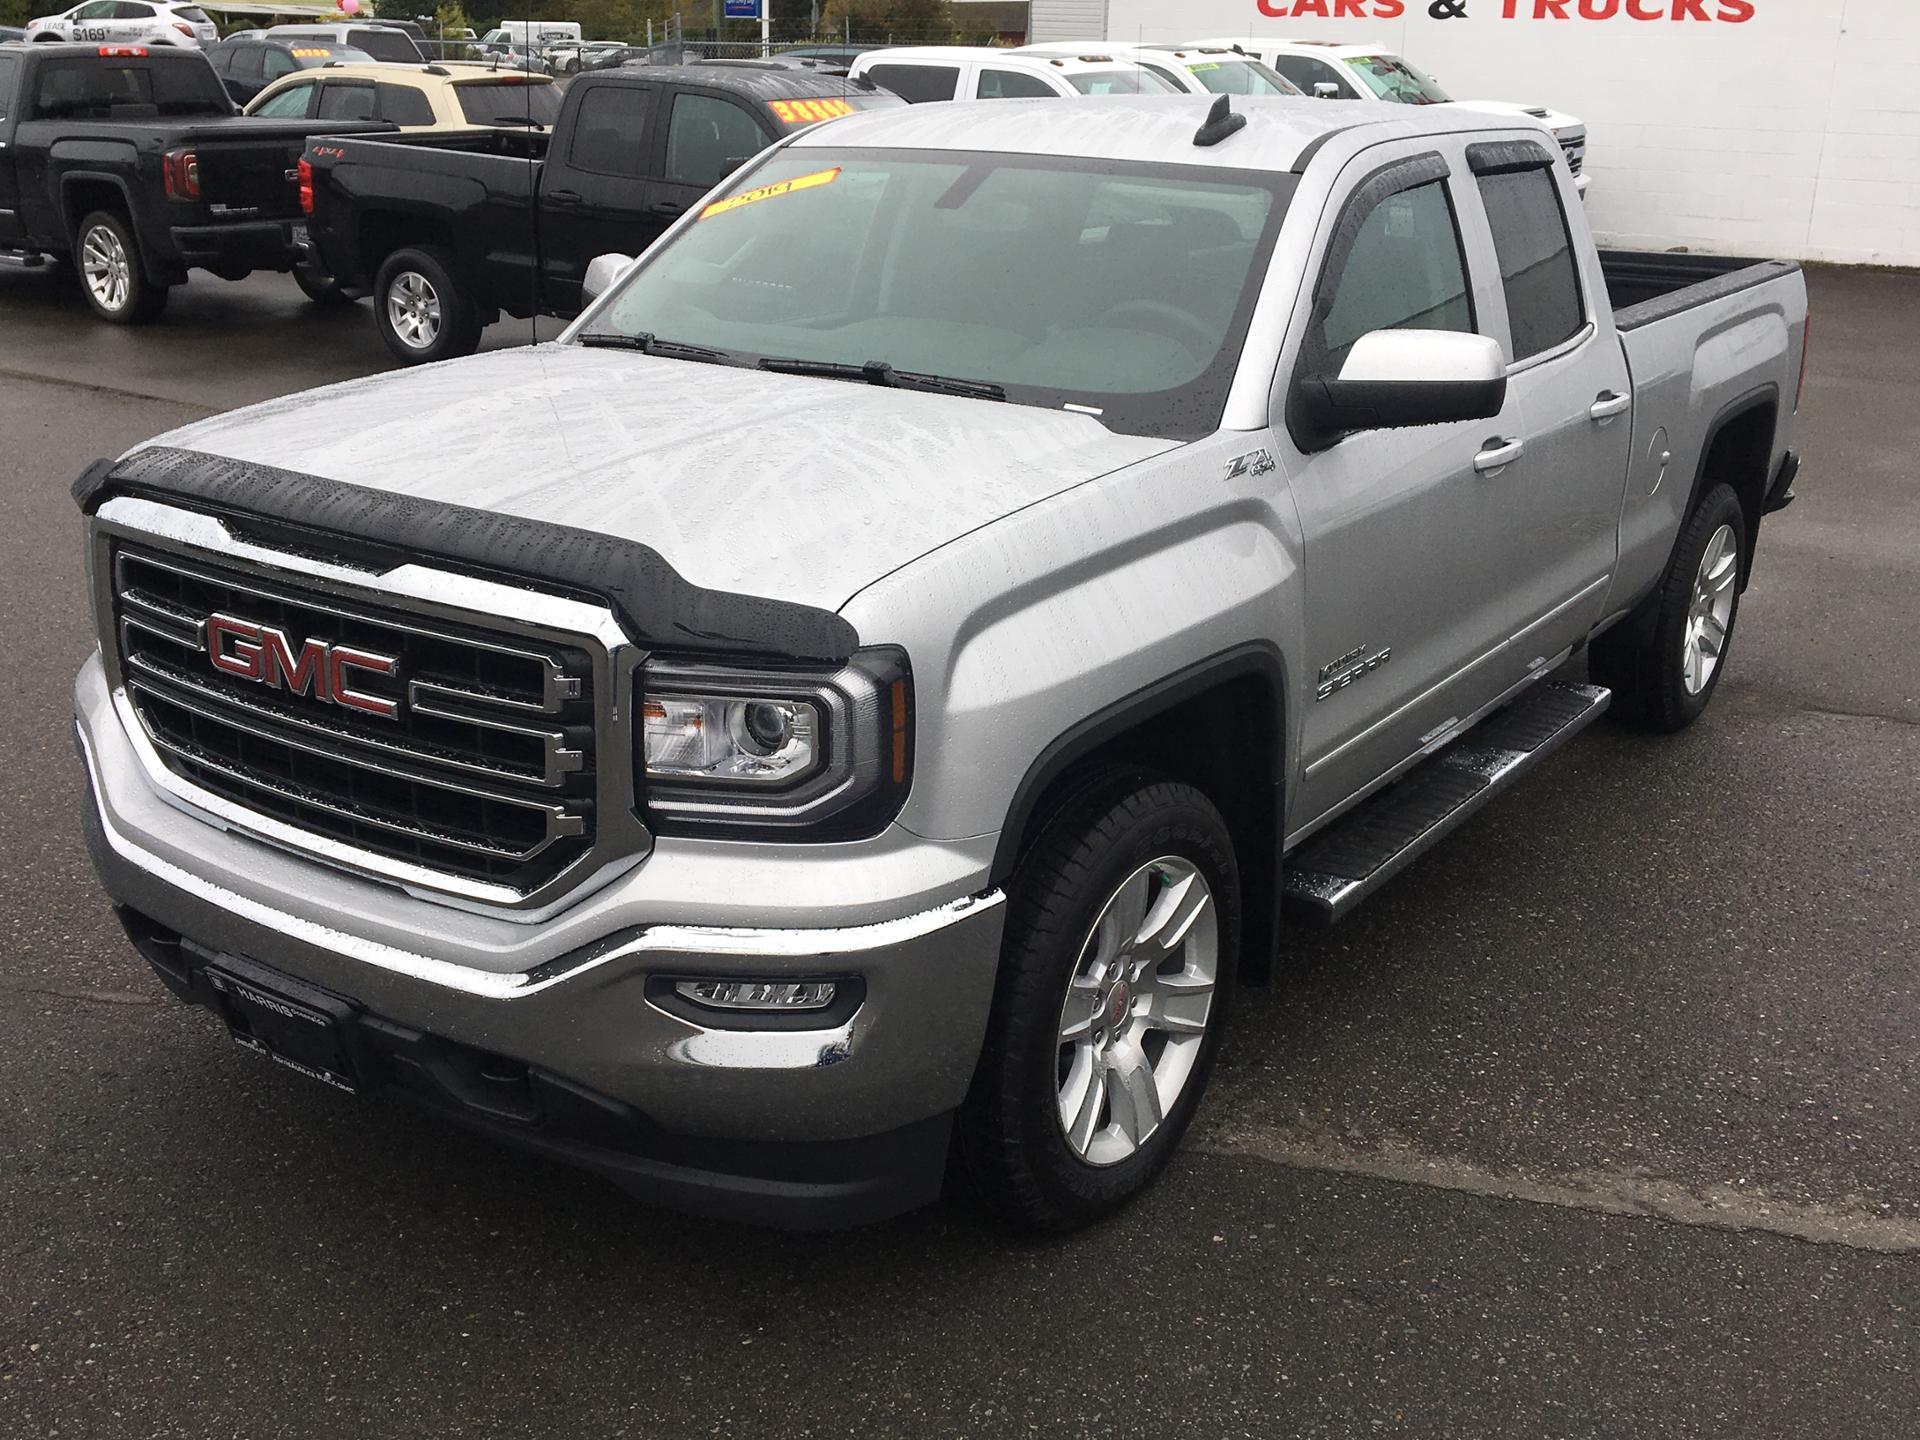 New 2019 GMC Sierra 1500 Limited SLE Pickup in Parksville 19012 